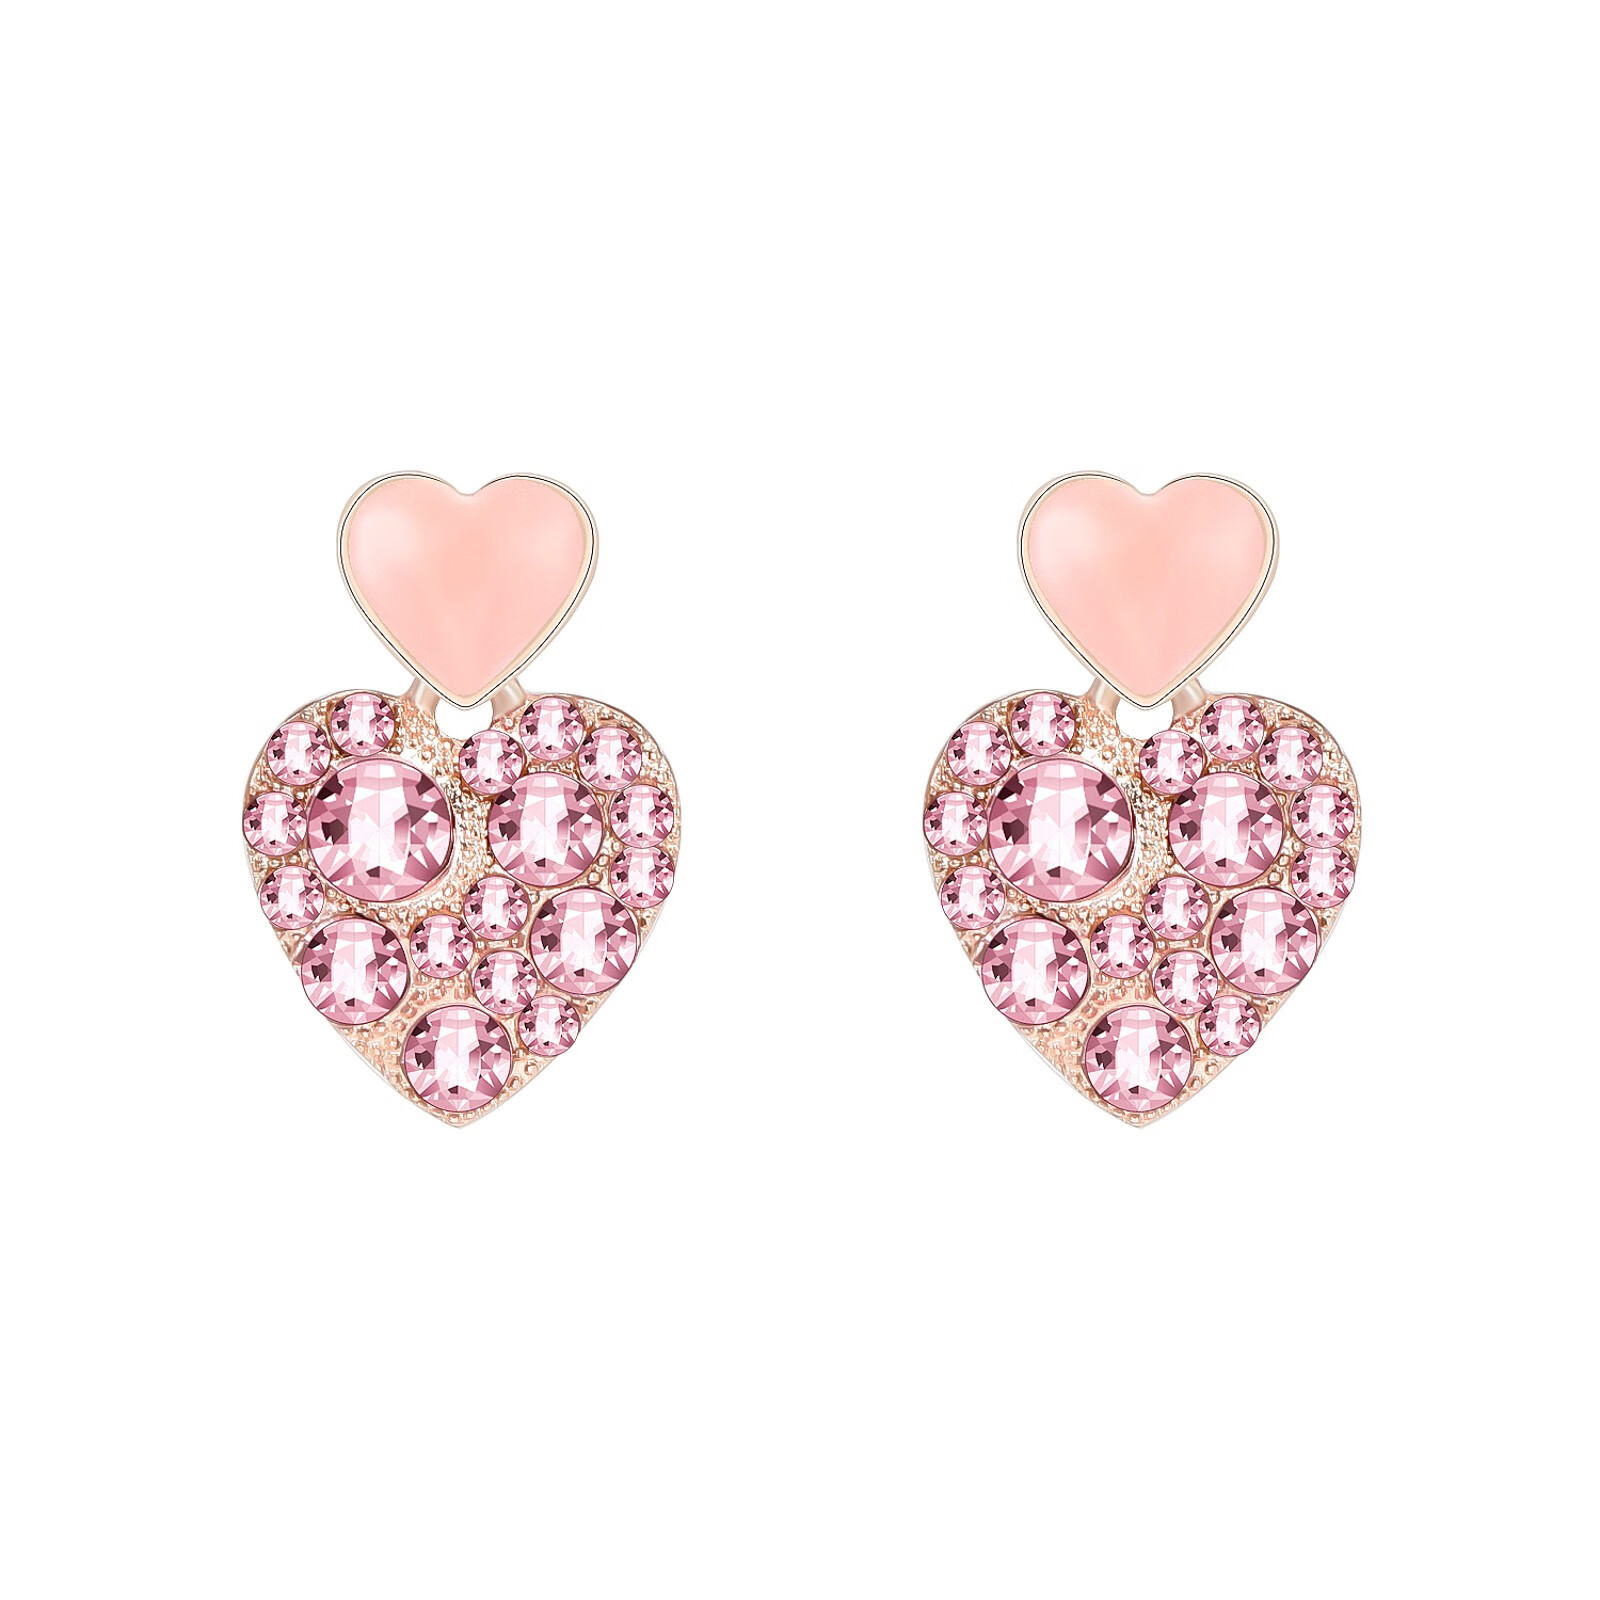 1 Pair Of Cute Little Earring Women And Men Decorate Earrings Different ...